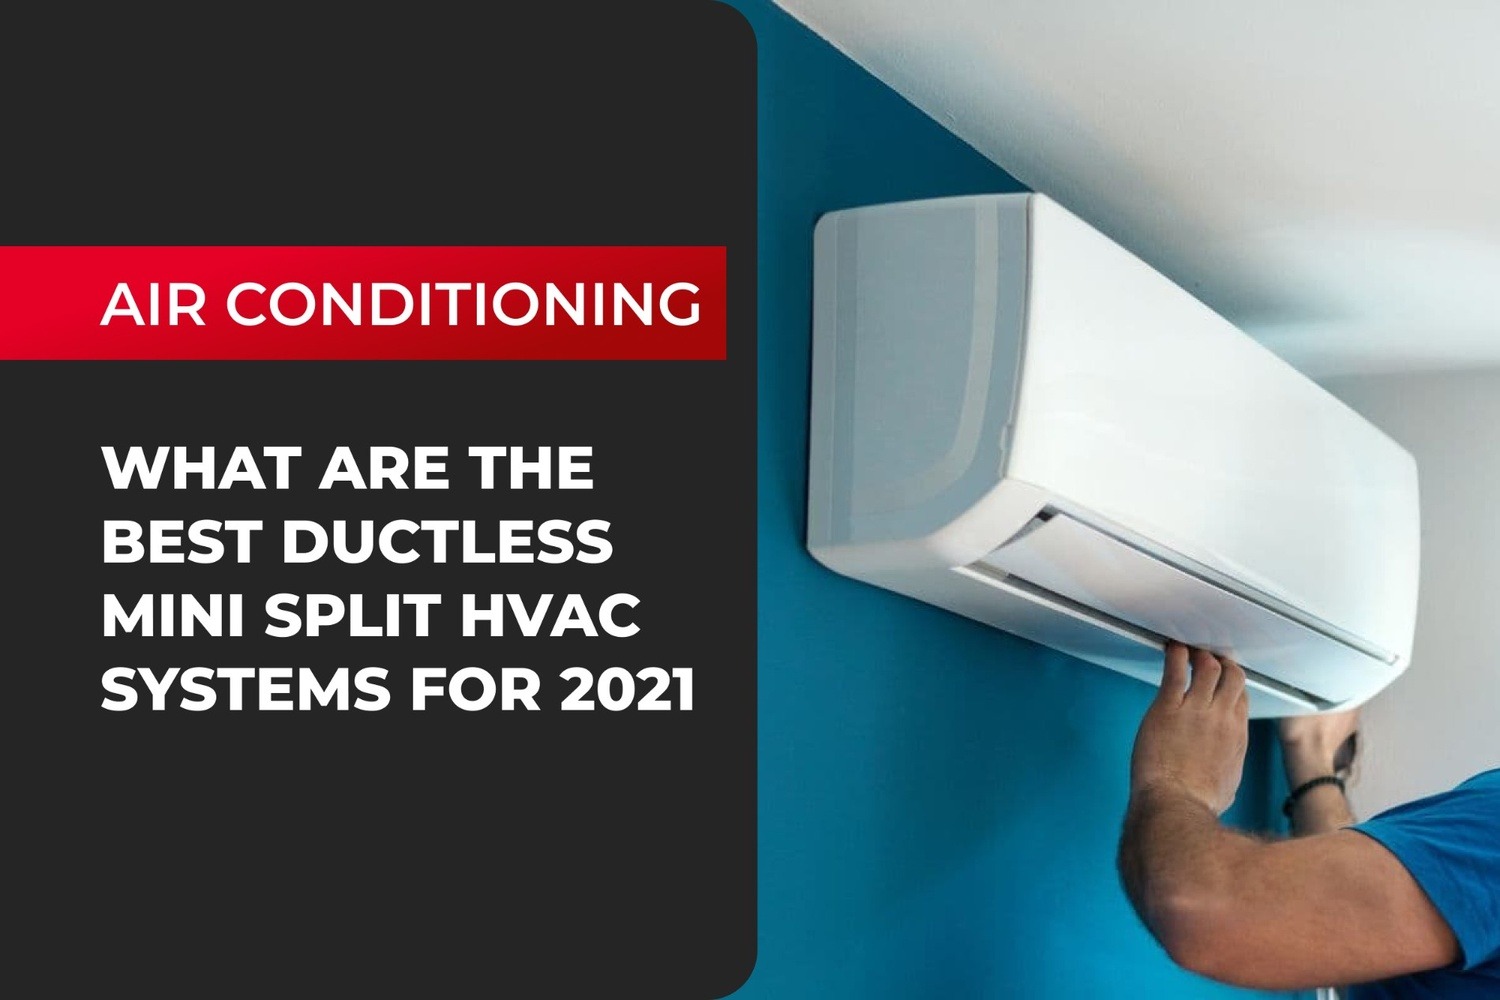 What Are The Best Ductless Mini-Split HVAC Systems for 2021?